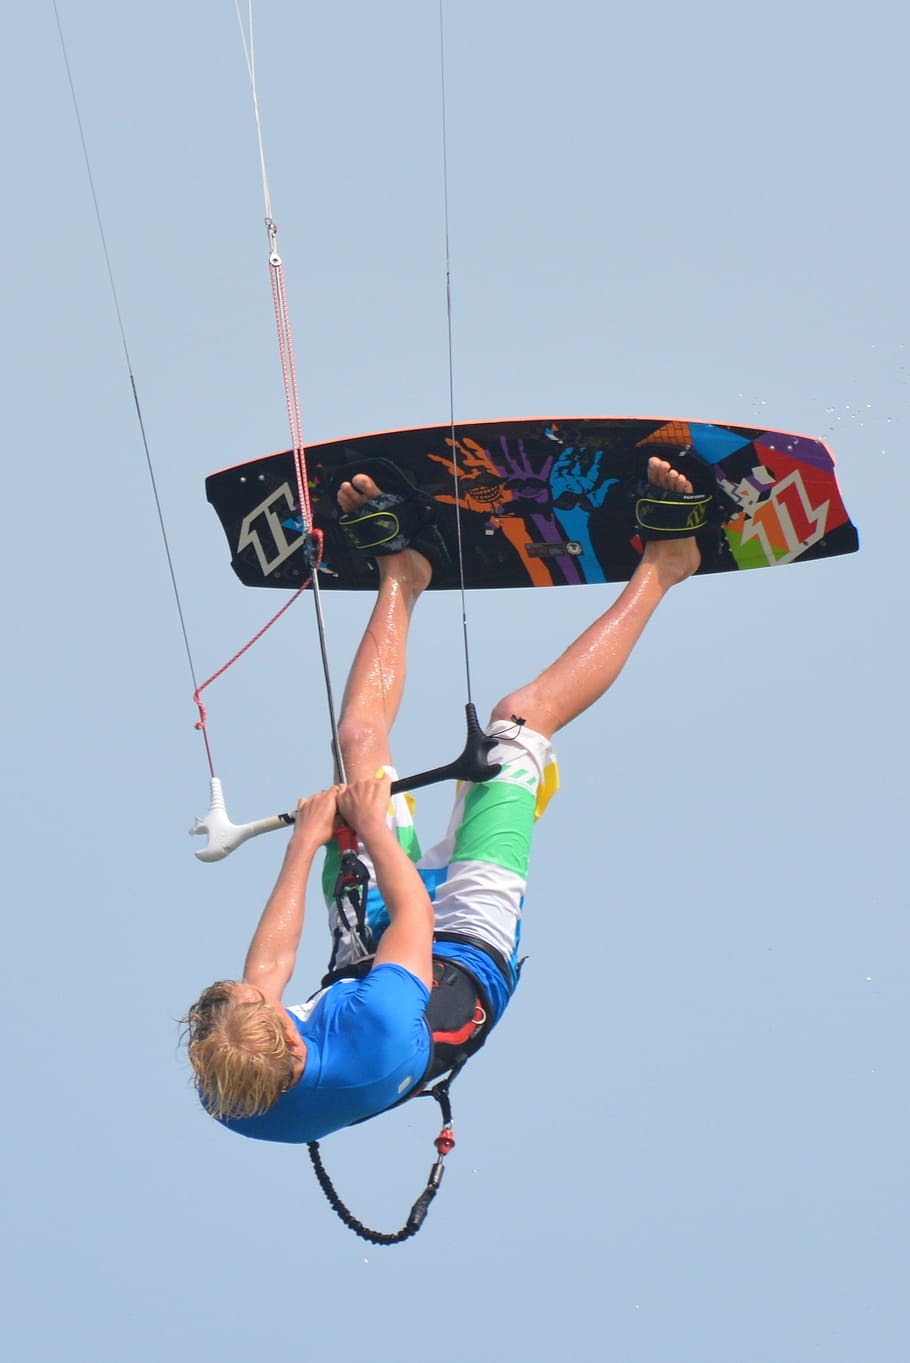 surf, kite surfing, man, people, sports, sky, sport, clear sky, full length, real people